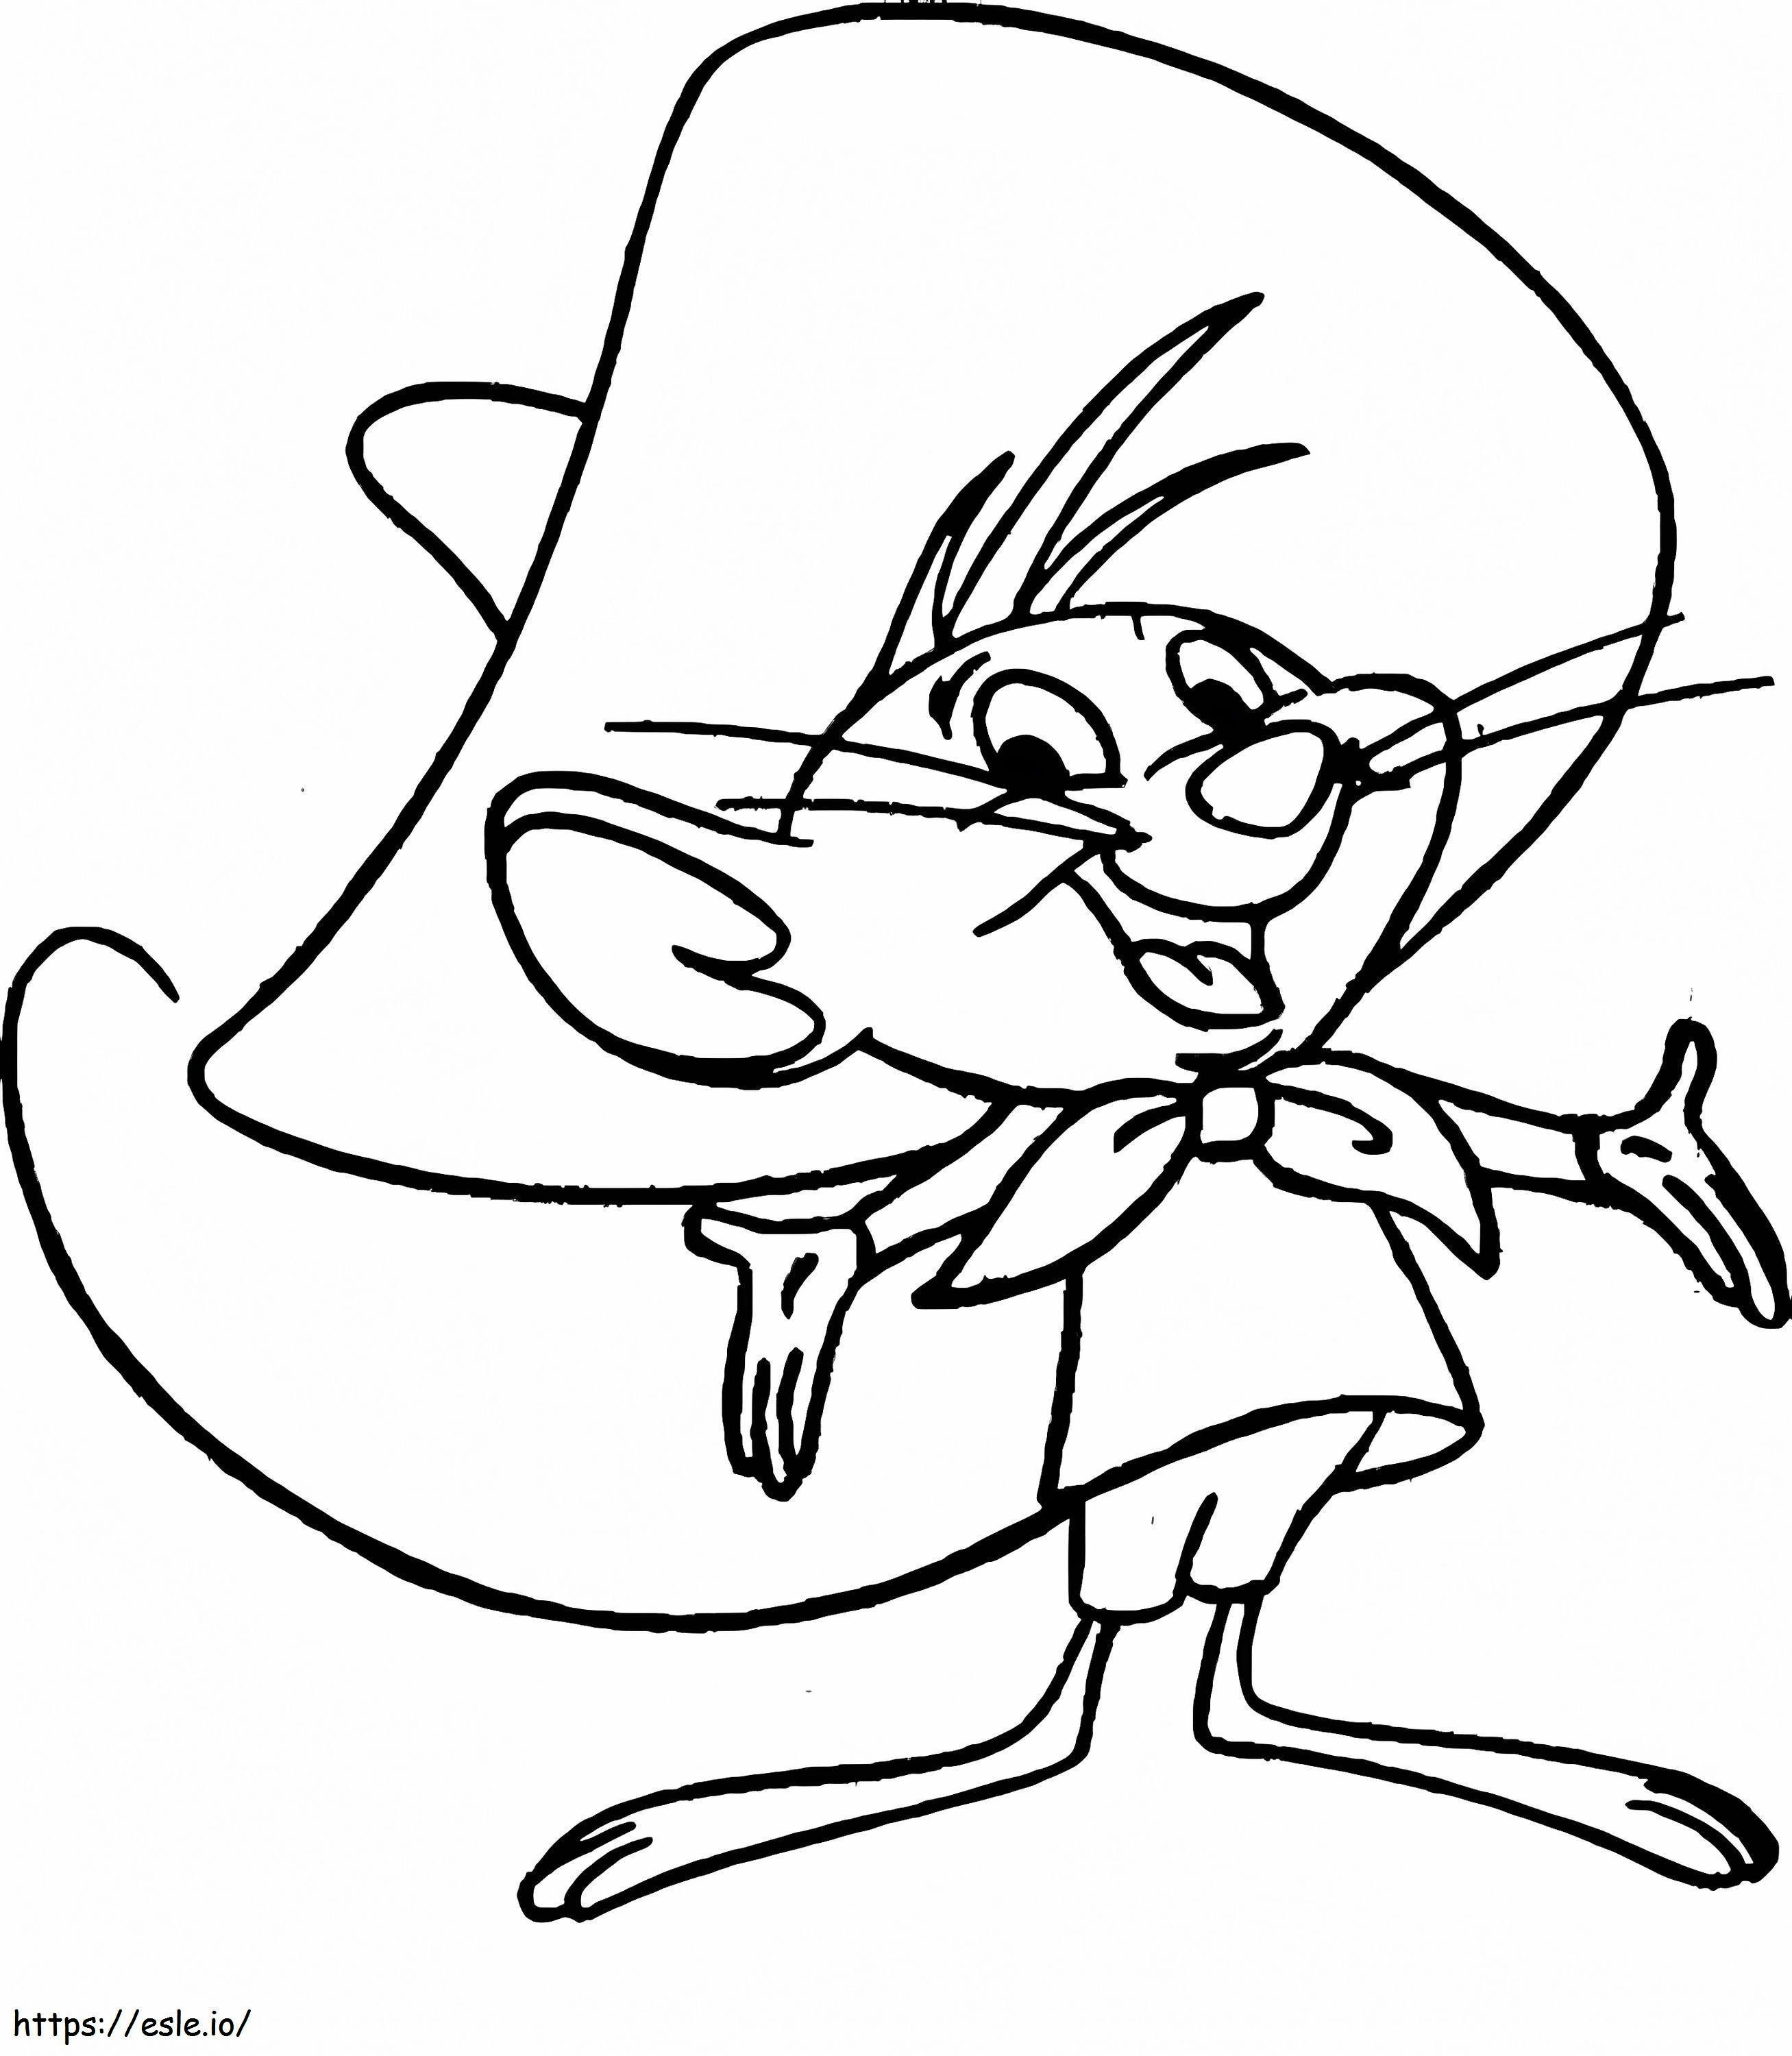 Speedy Gonzales Smiling coloring page